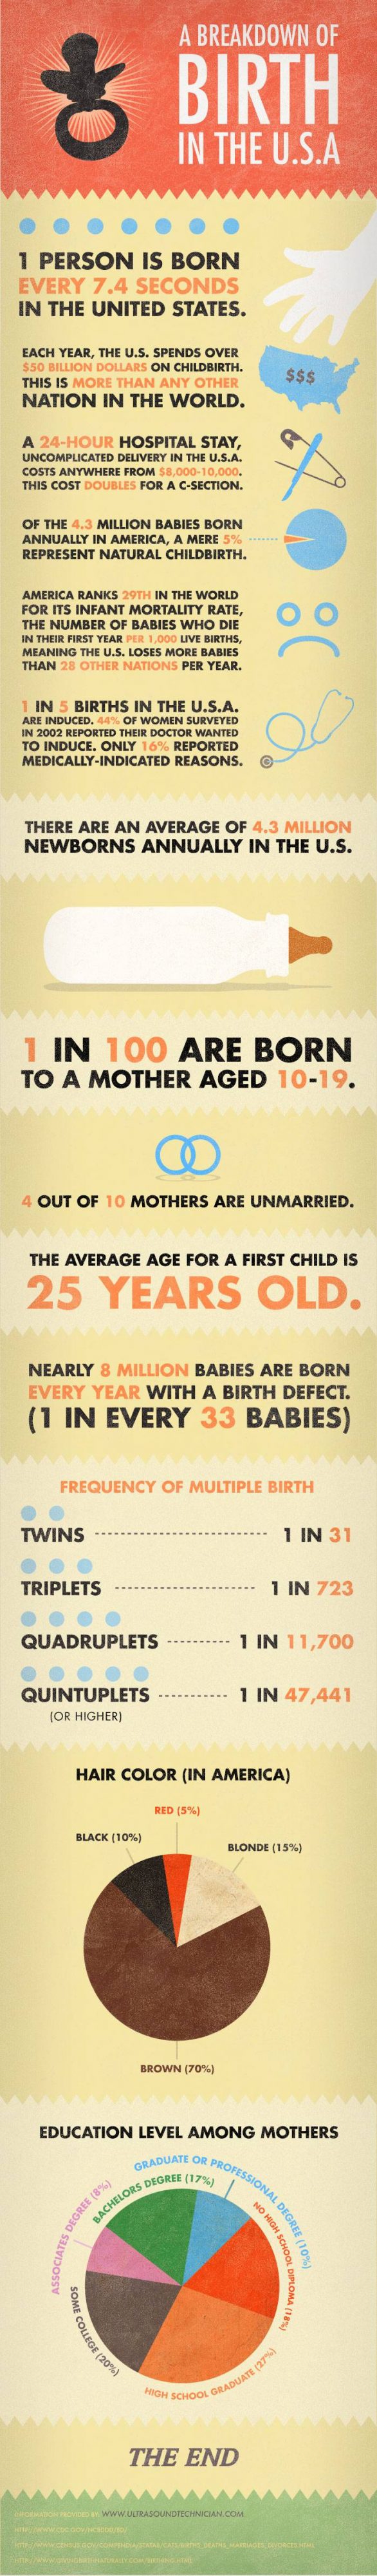 A Breakdown of Birth in the U.S. (Infographic)